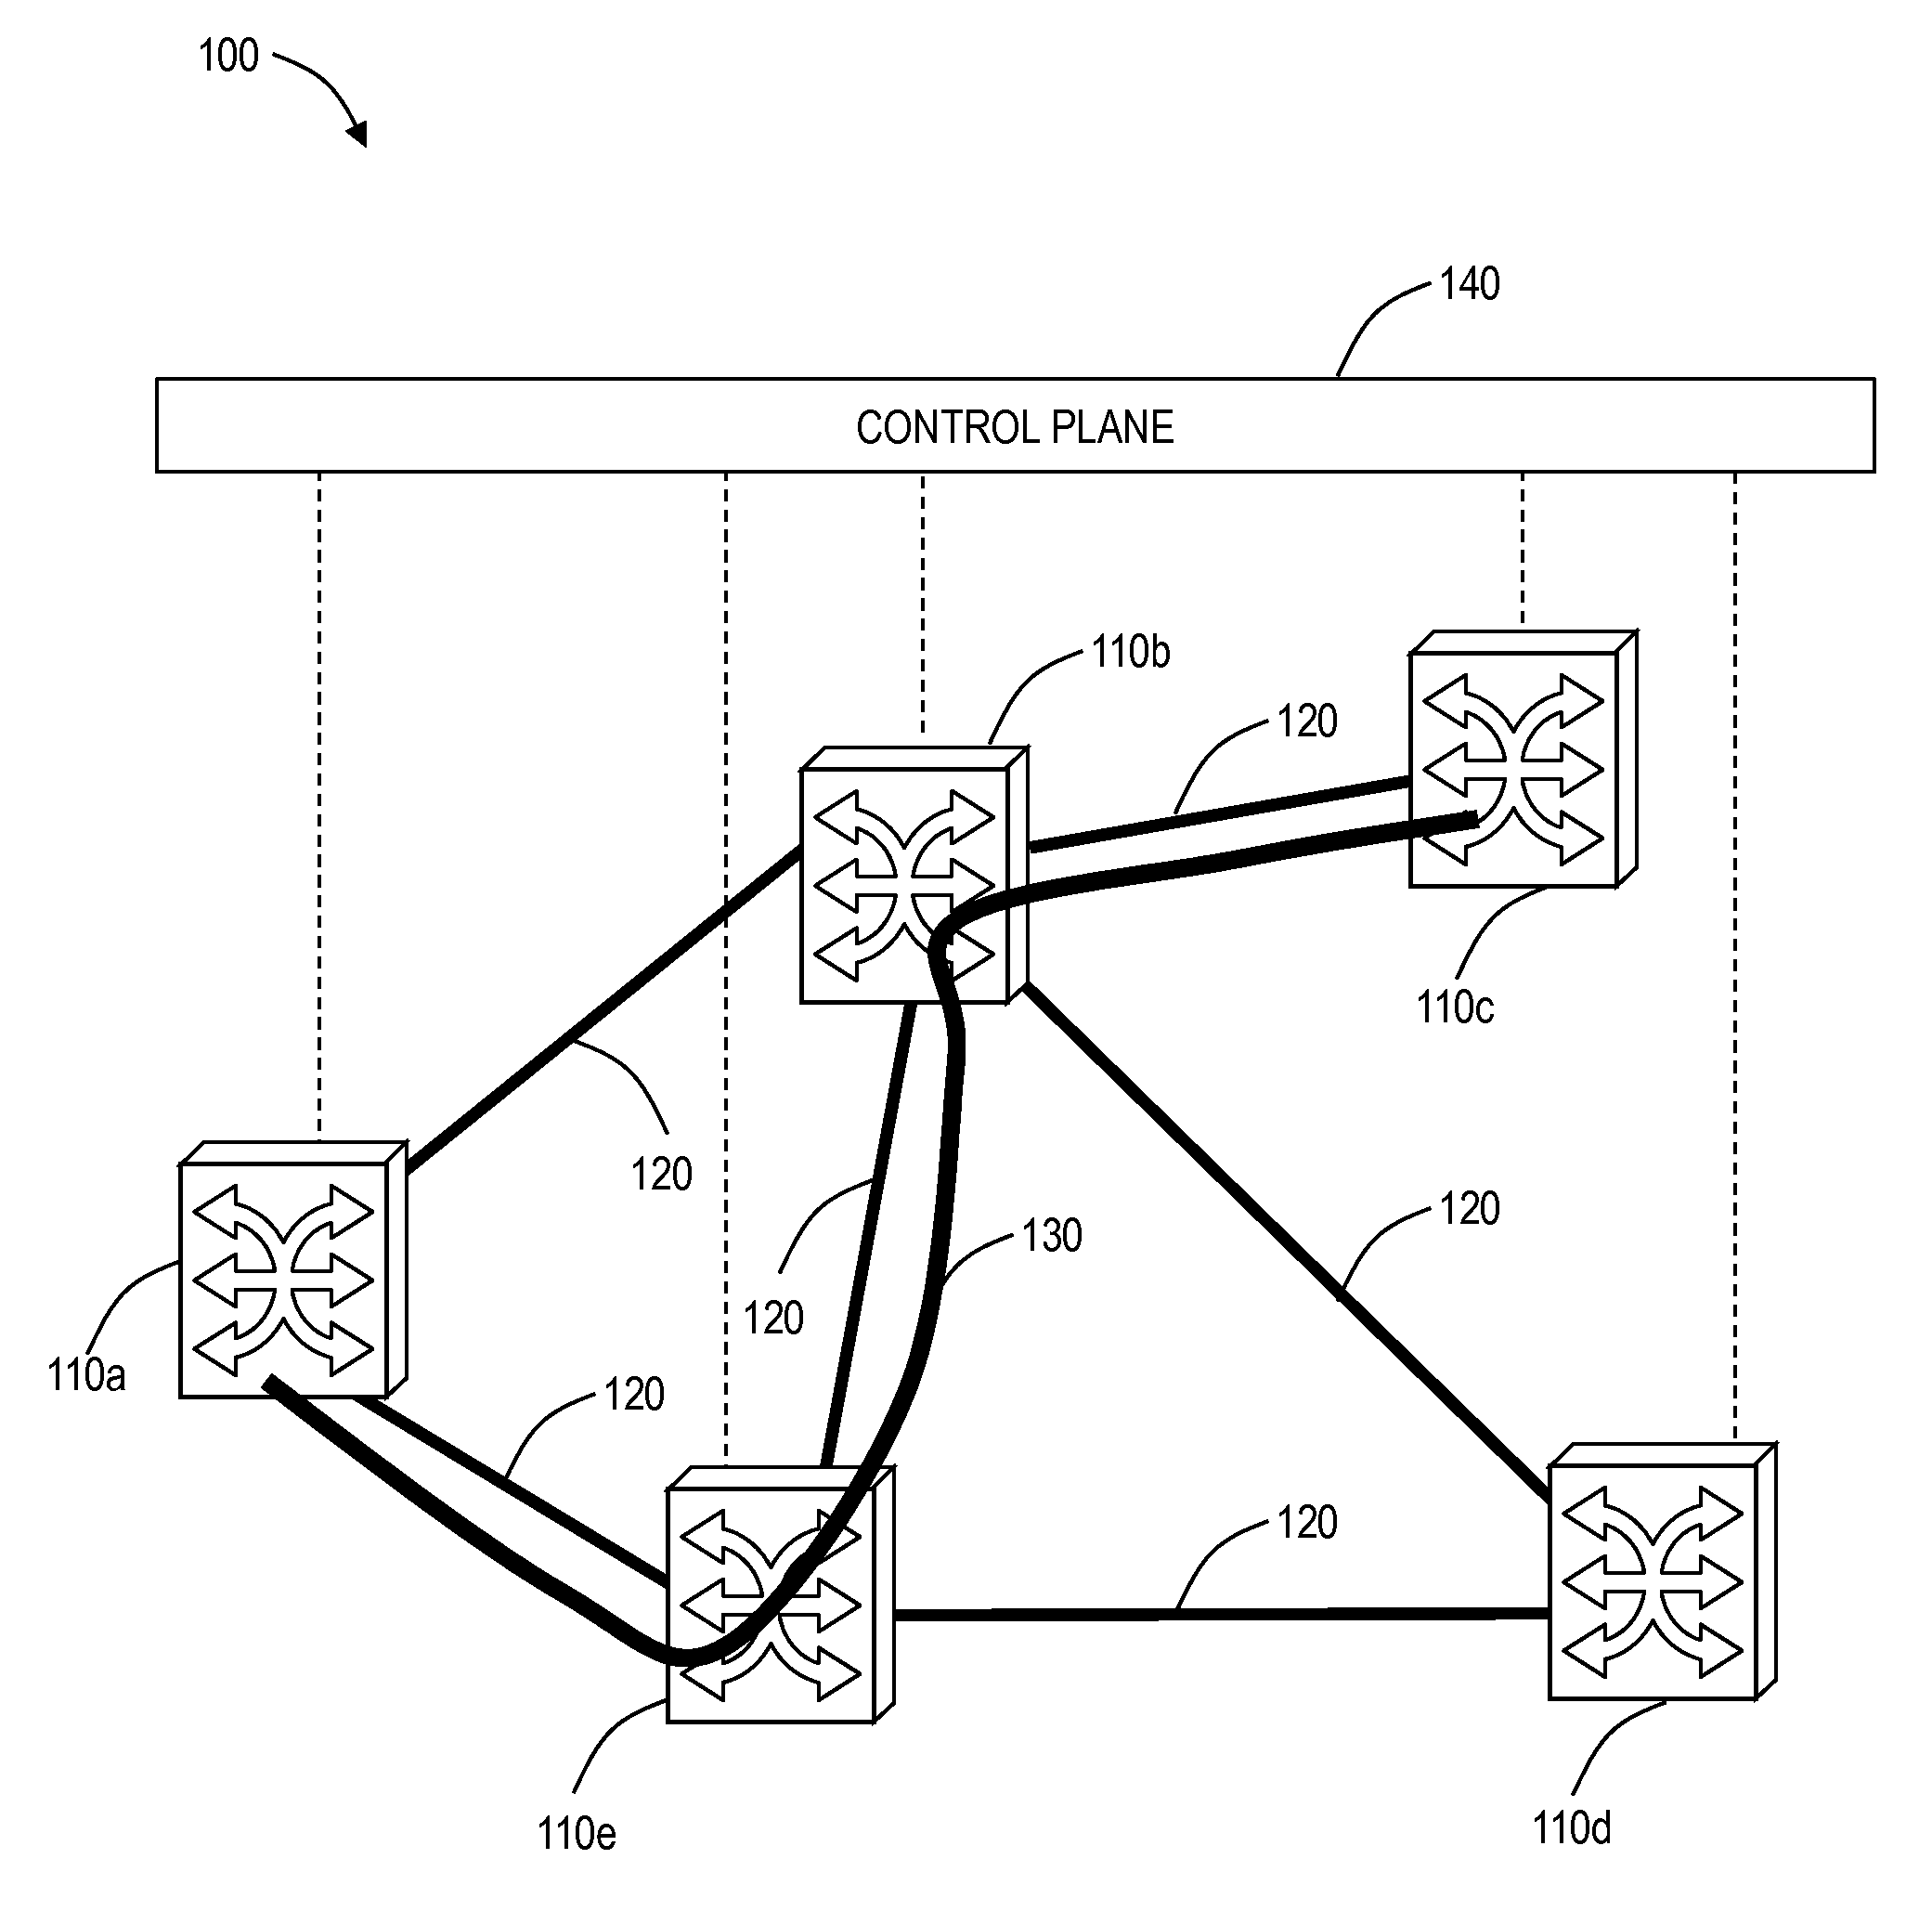 Optical transport network transient management systems and methods